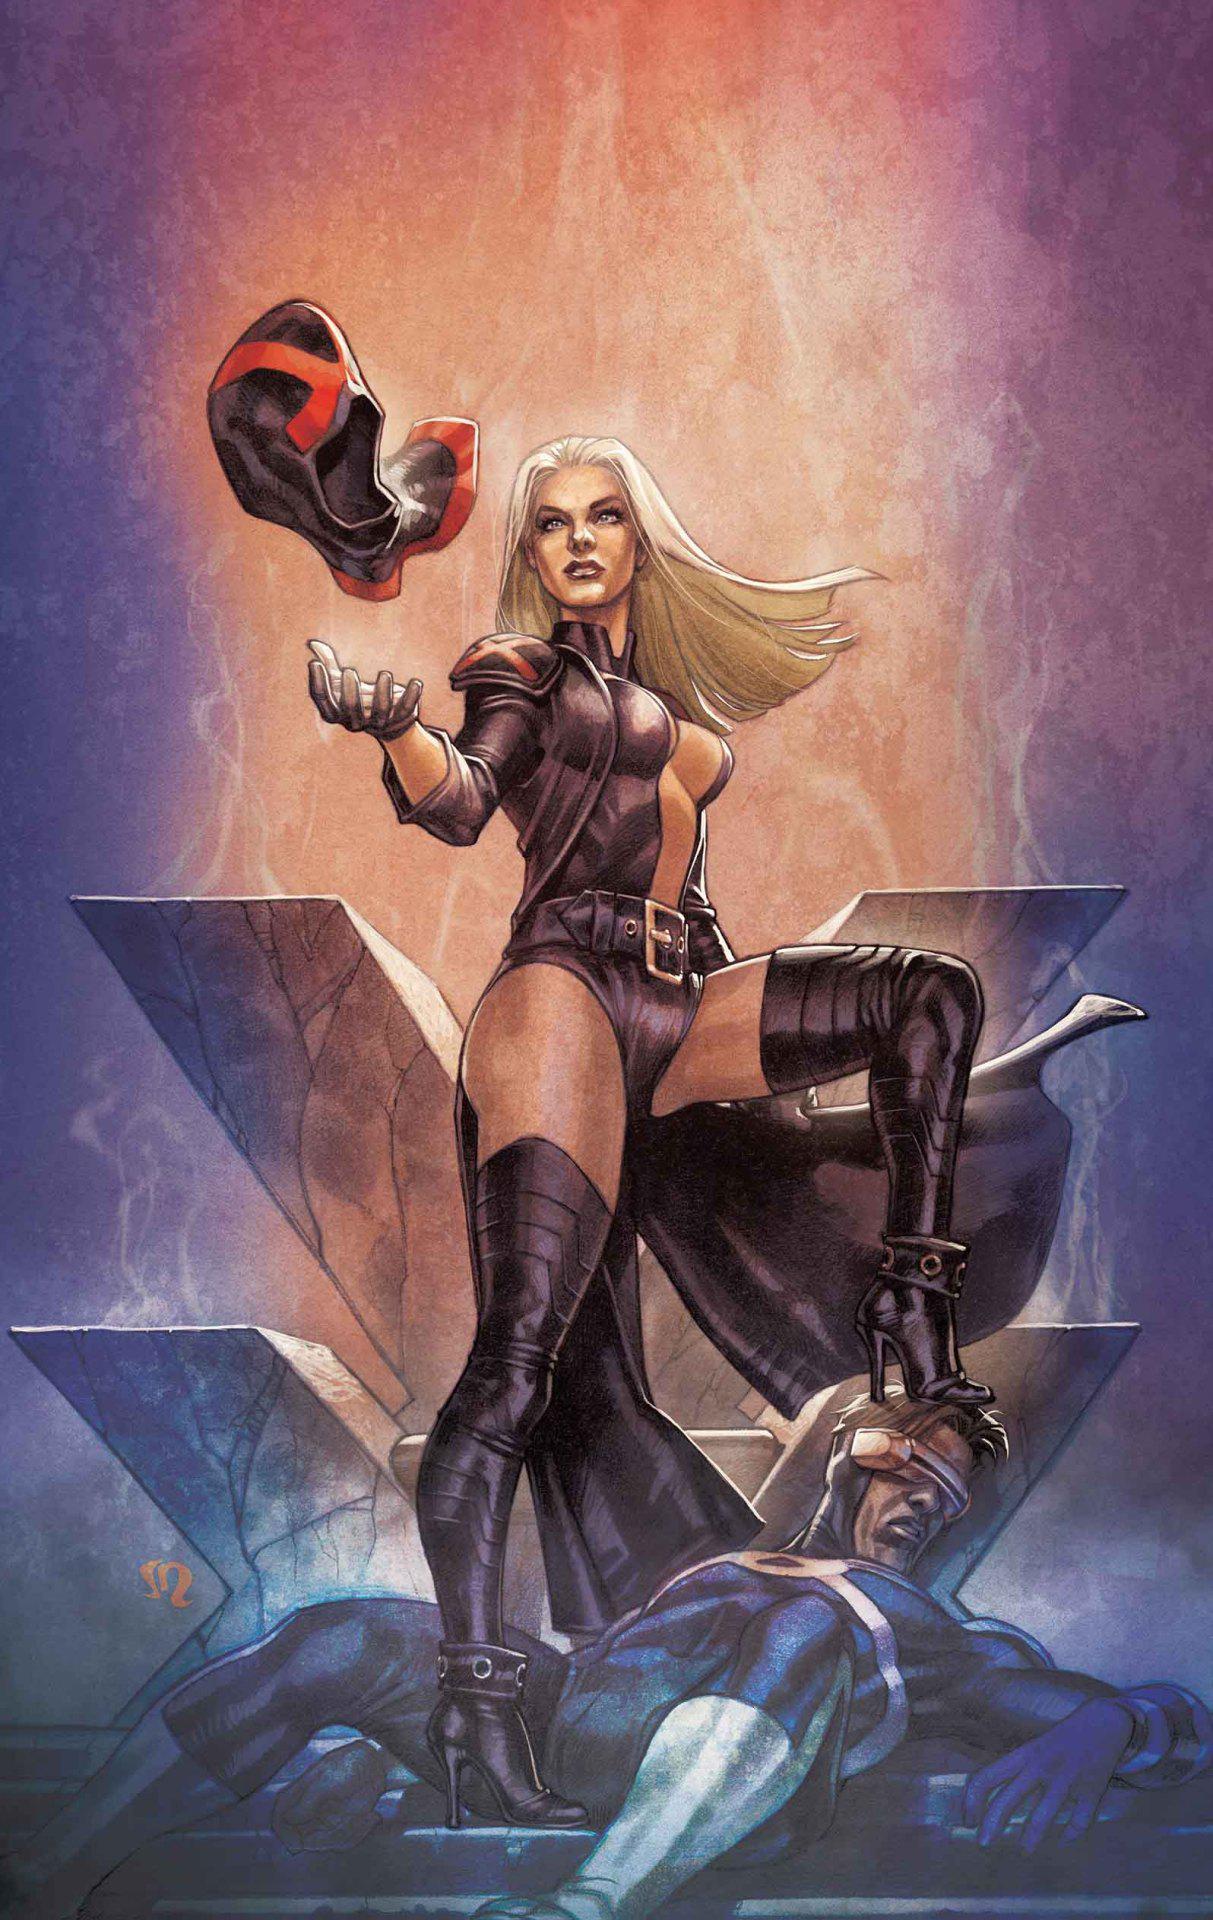 cth58q-Emma_Frost_from_All_New_X-Men_18_variant_cover__by_Stephane_Roux.-v2nfuubd4th31.jpg